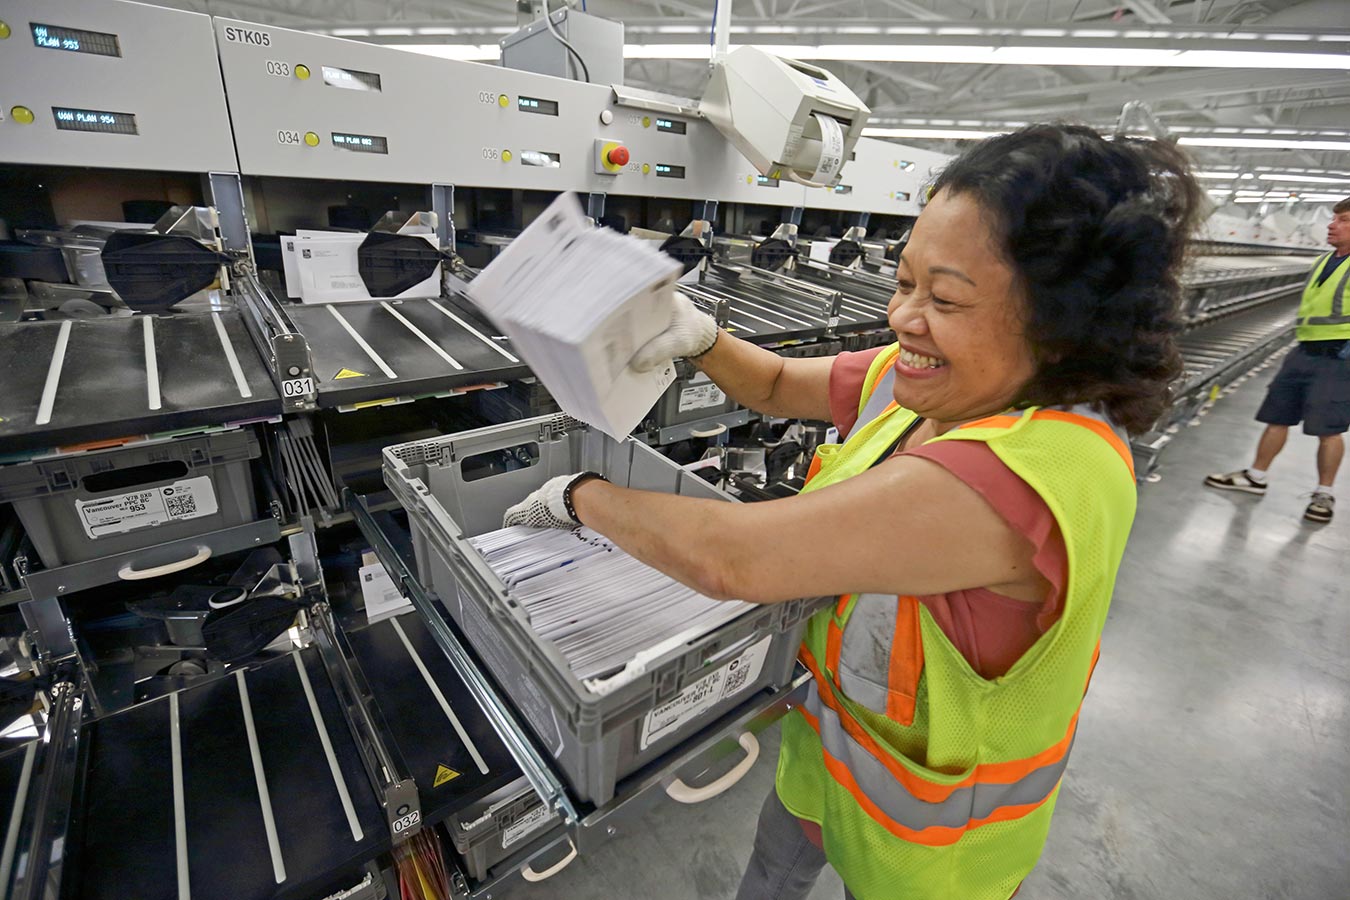 Canada Post employee sorting letter mail at a mail processing centre